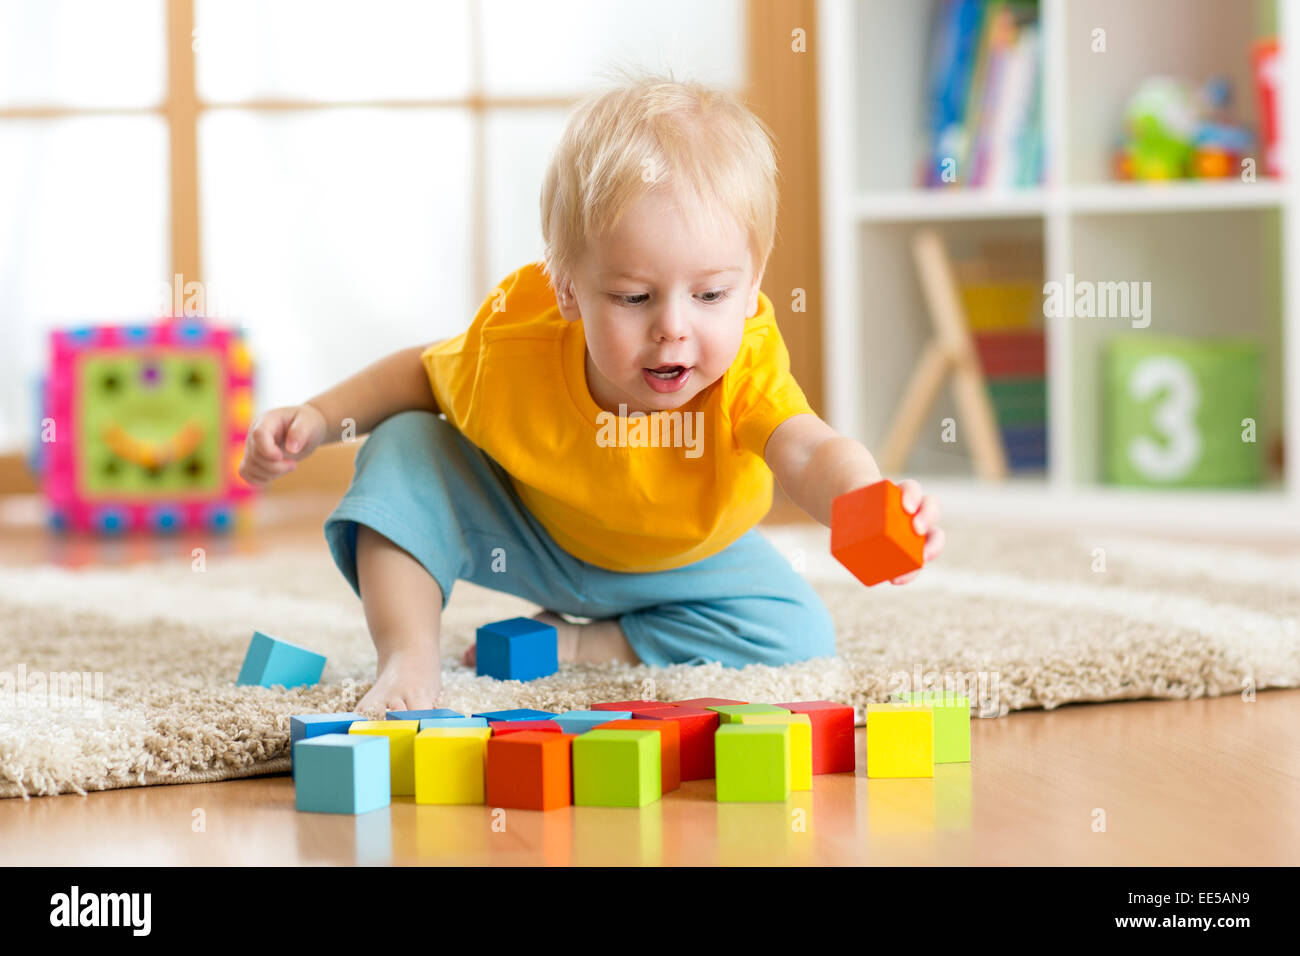 child toddler playing wooden toys at home Stock Photo